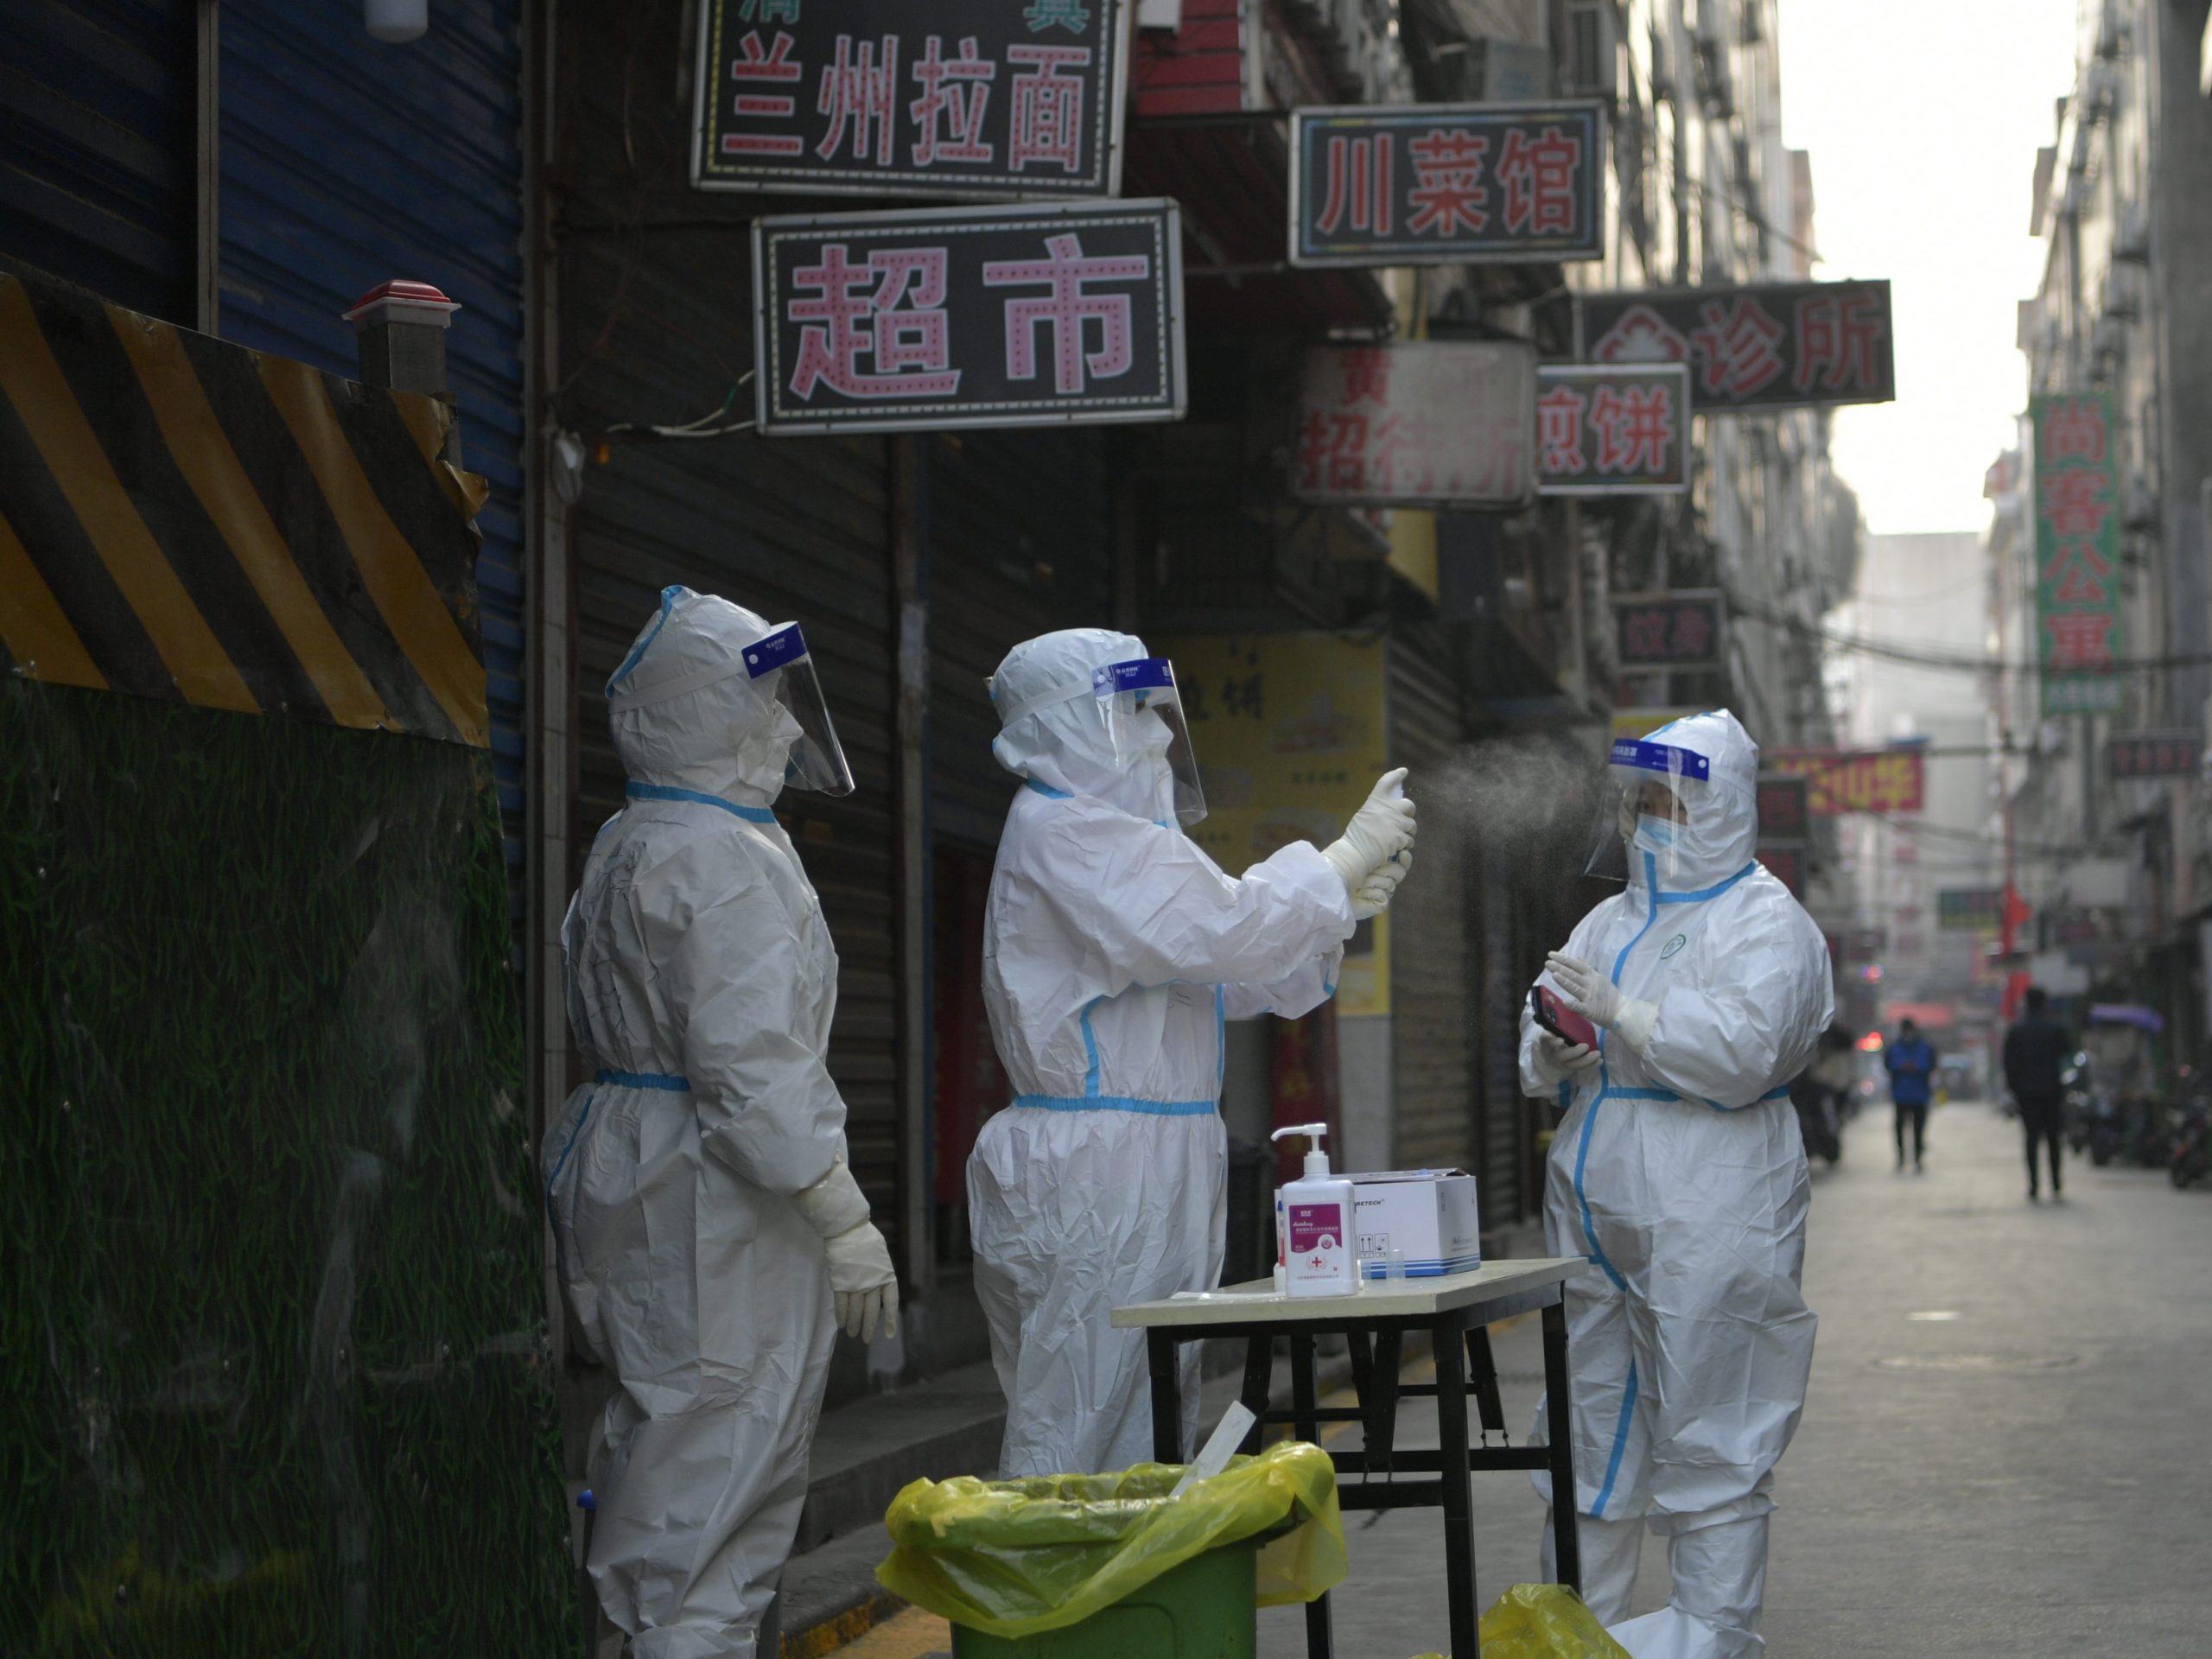 Three workers standing on a deserted street in Xi'an, China, wearing full protective gear.